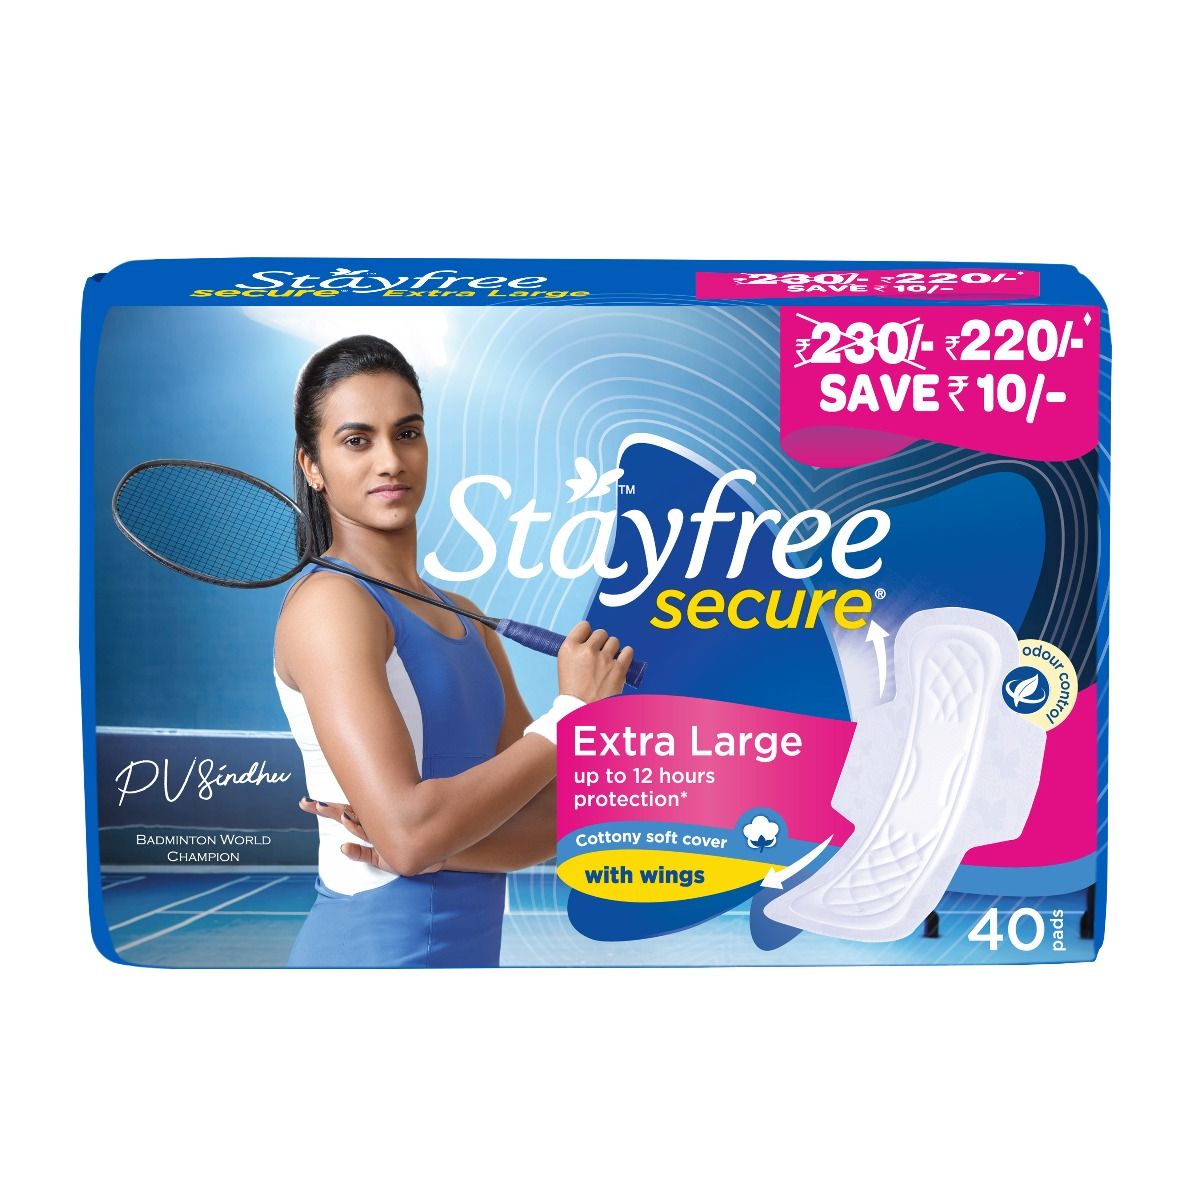 Buy Stayfree Secure Cottony Soft Cover Pads With Wings XL, 40 Count Online